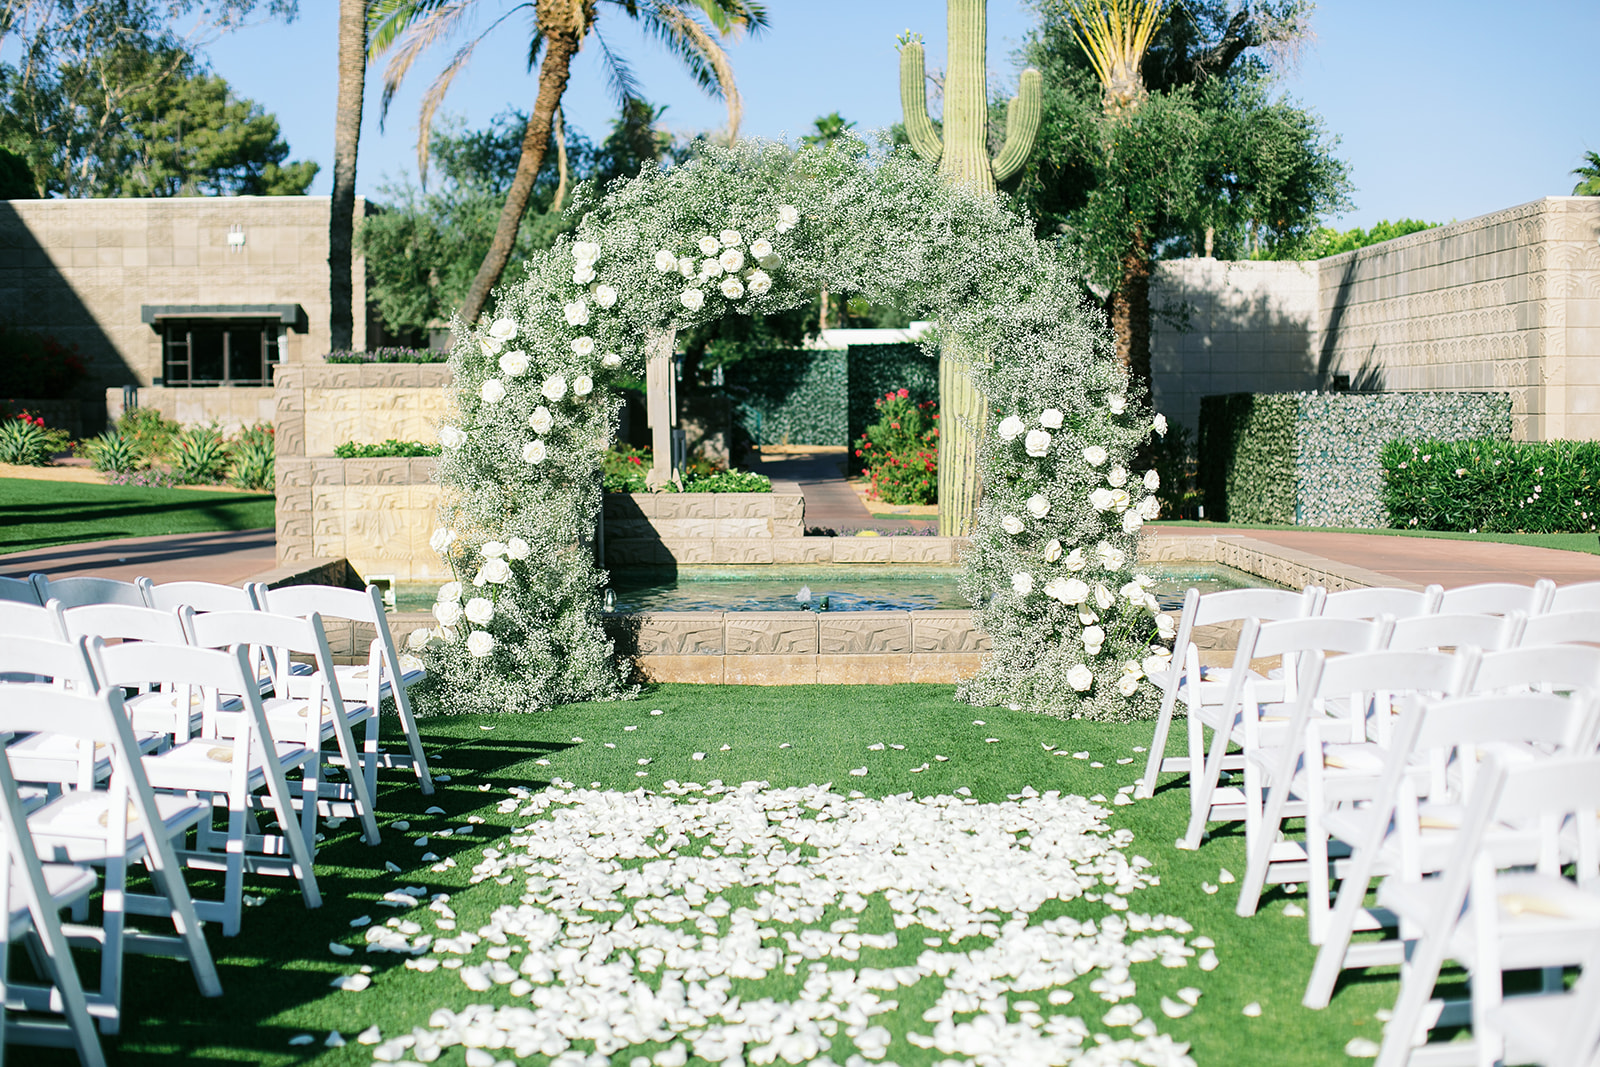 Baby's breath wedding ceremony arch with white roses and white rose petals down aisle.